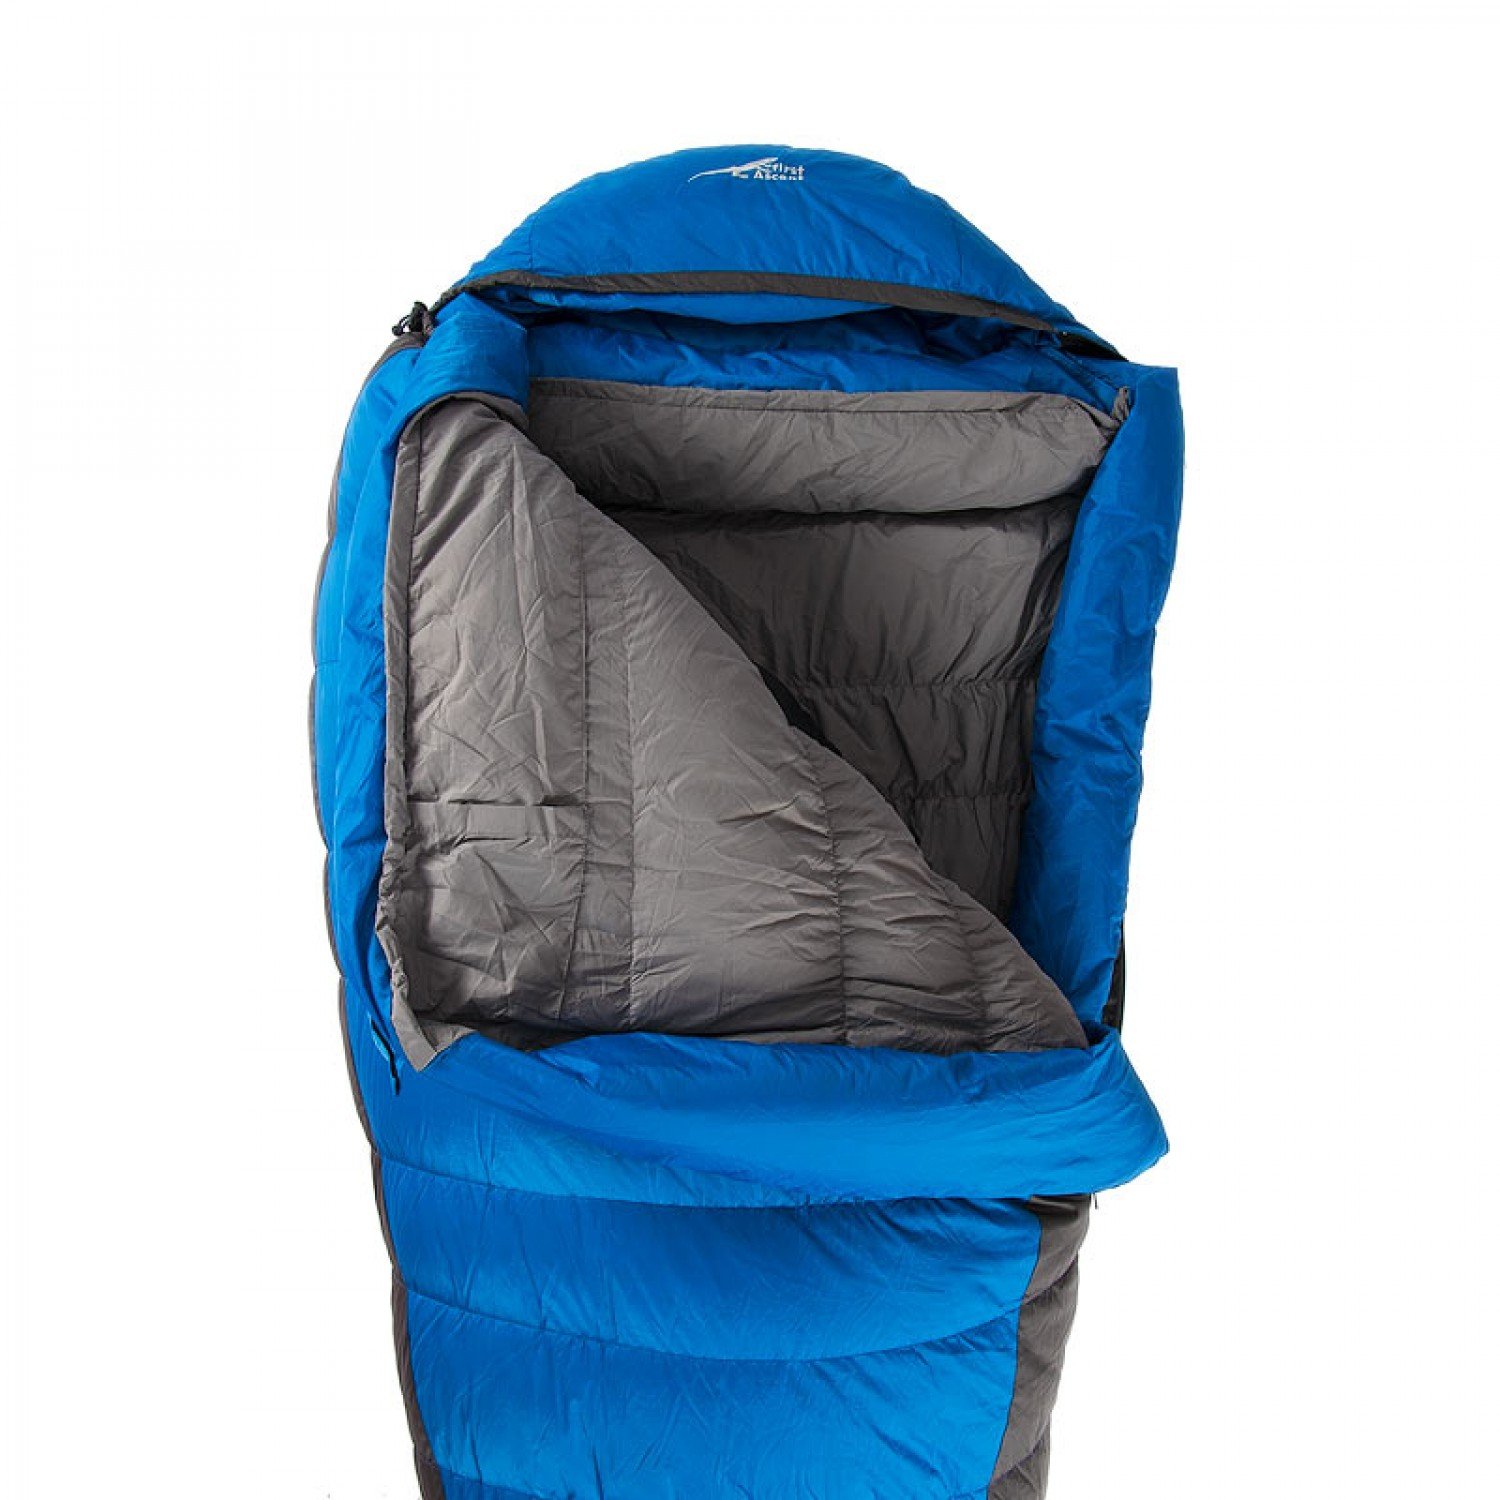 Amplify Down 900 Sleeping Bag - First Ascent